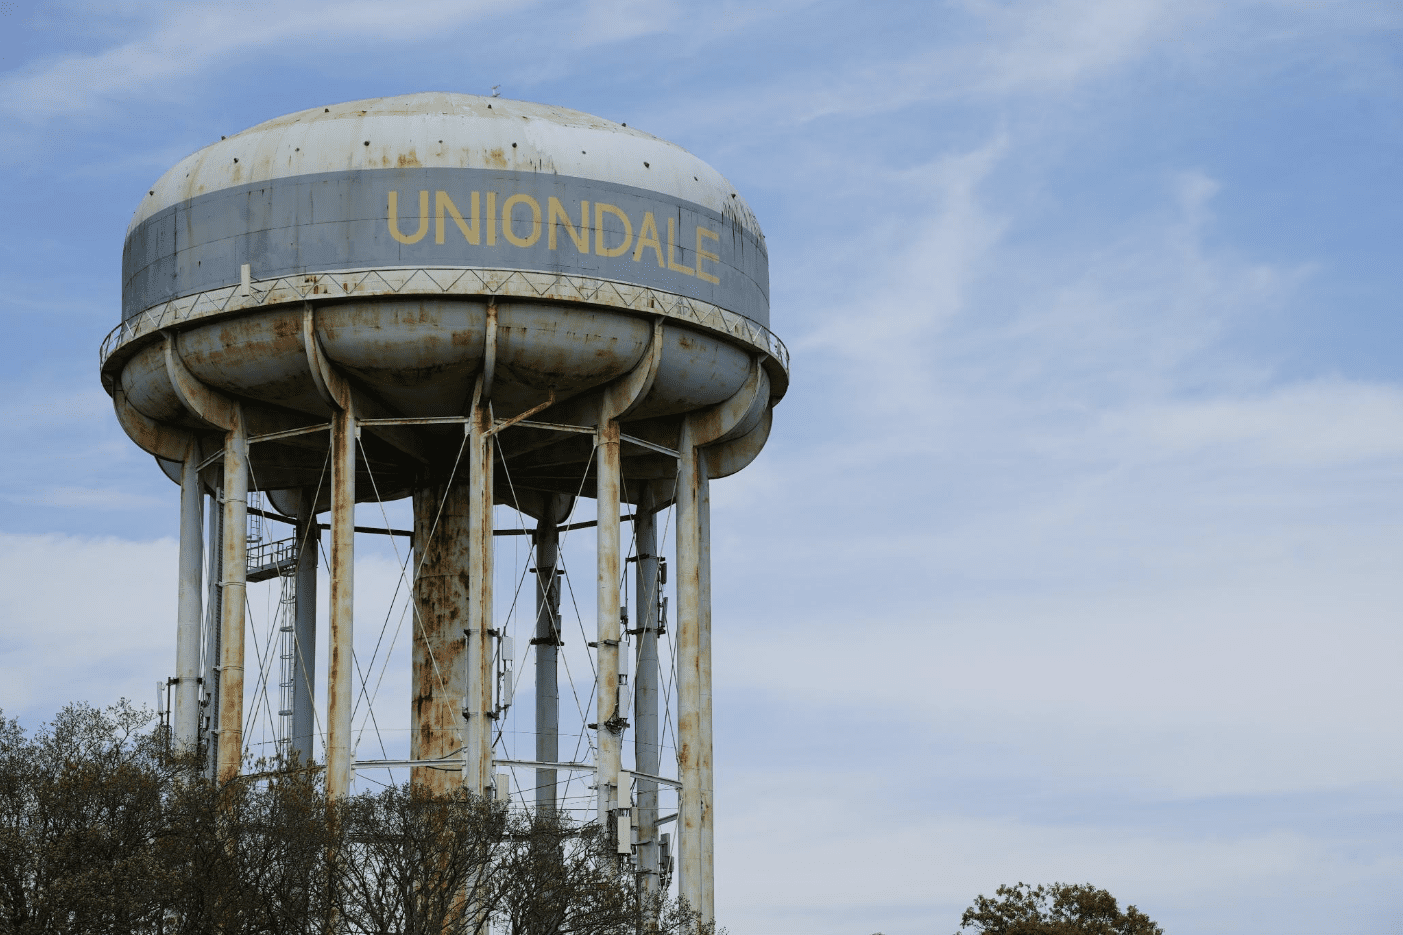 Brown, contaminated drinking water at issue in Uniondale